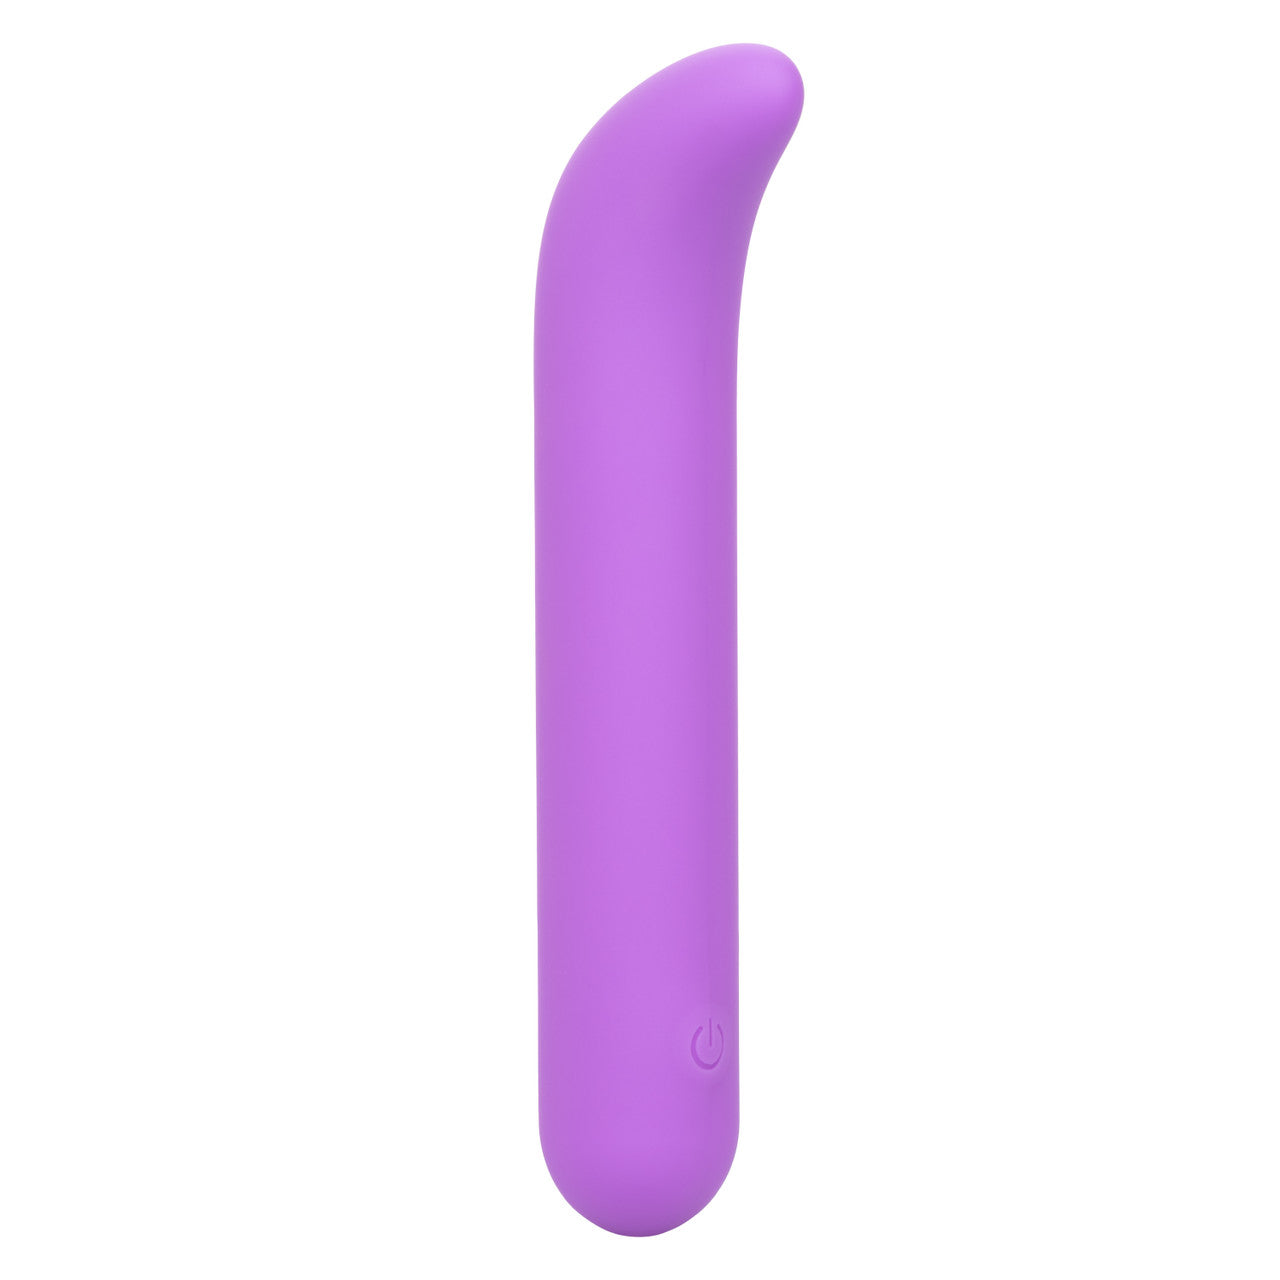  Fuscia mini vibrator with curved tip for g-spot stimulation and single power control button at the bottom. Great for self-love.